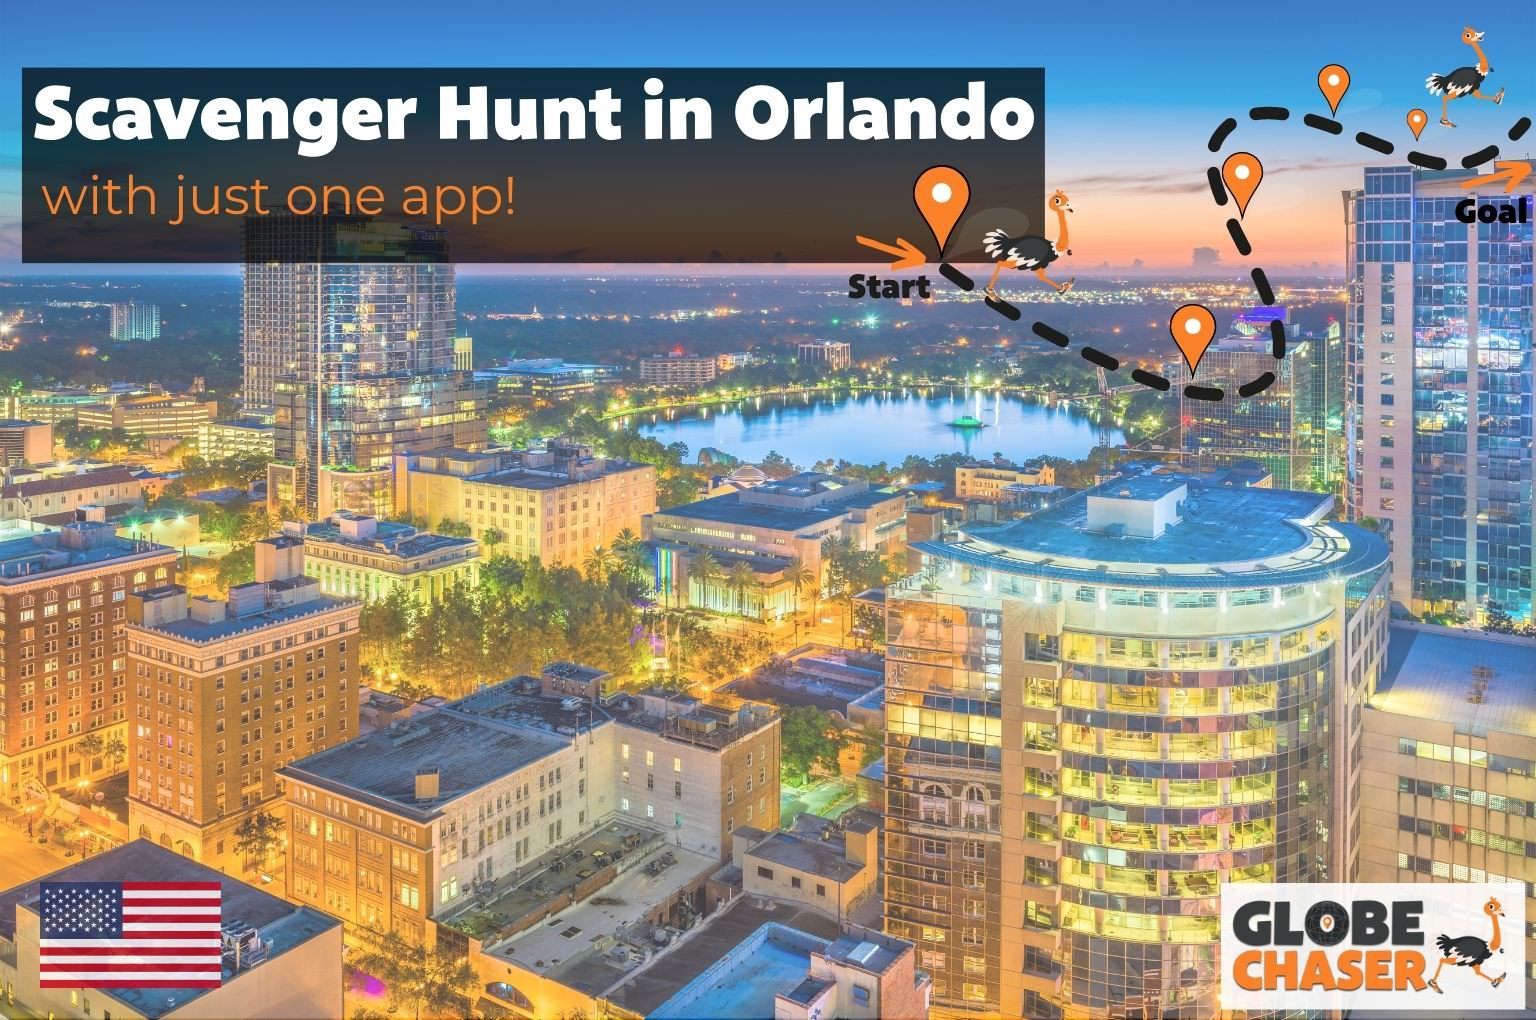 Scavenger Hunt in Orlando, USA - Family Activities with the Globe Chaser App for Outdoor Fun